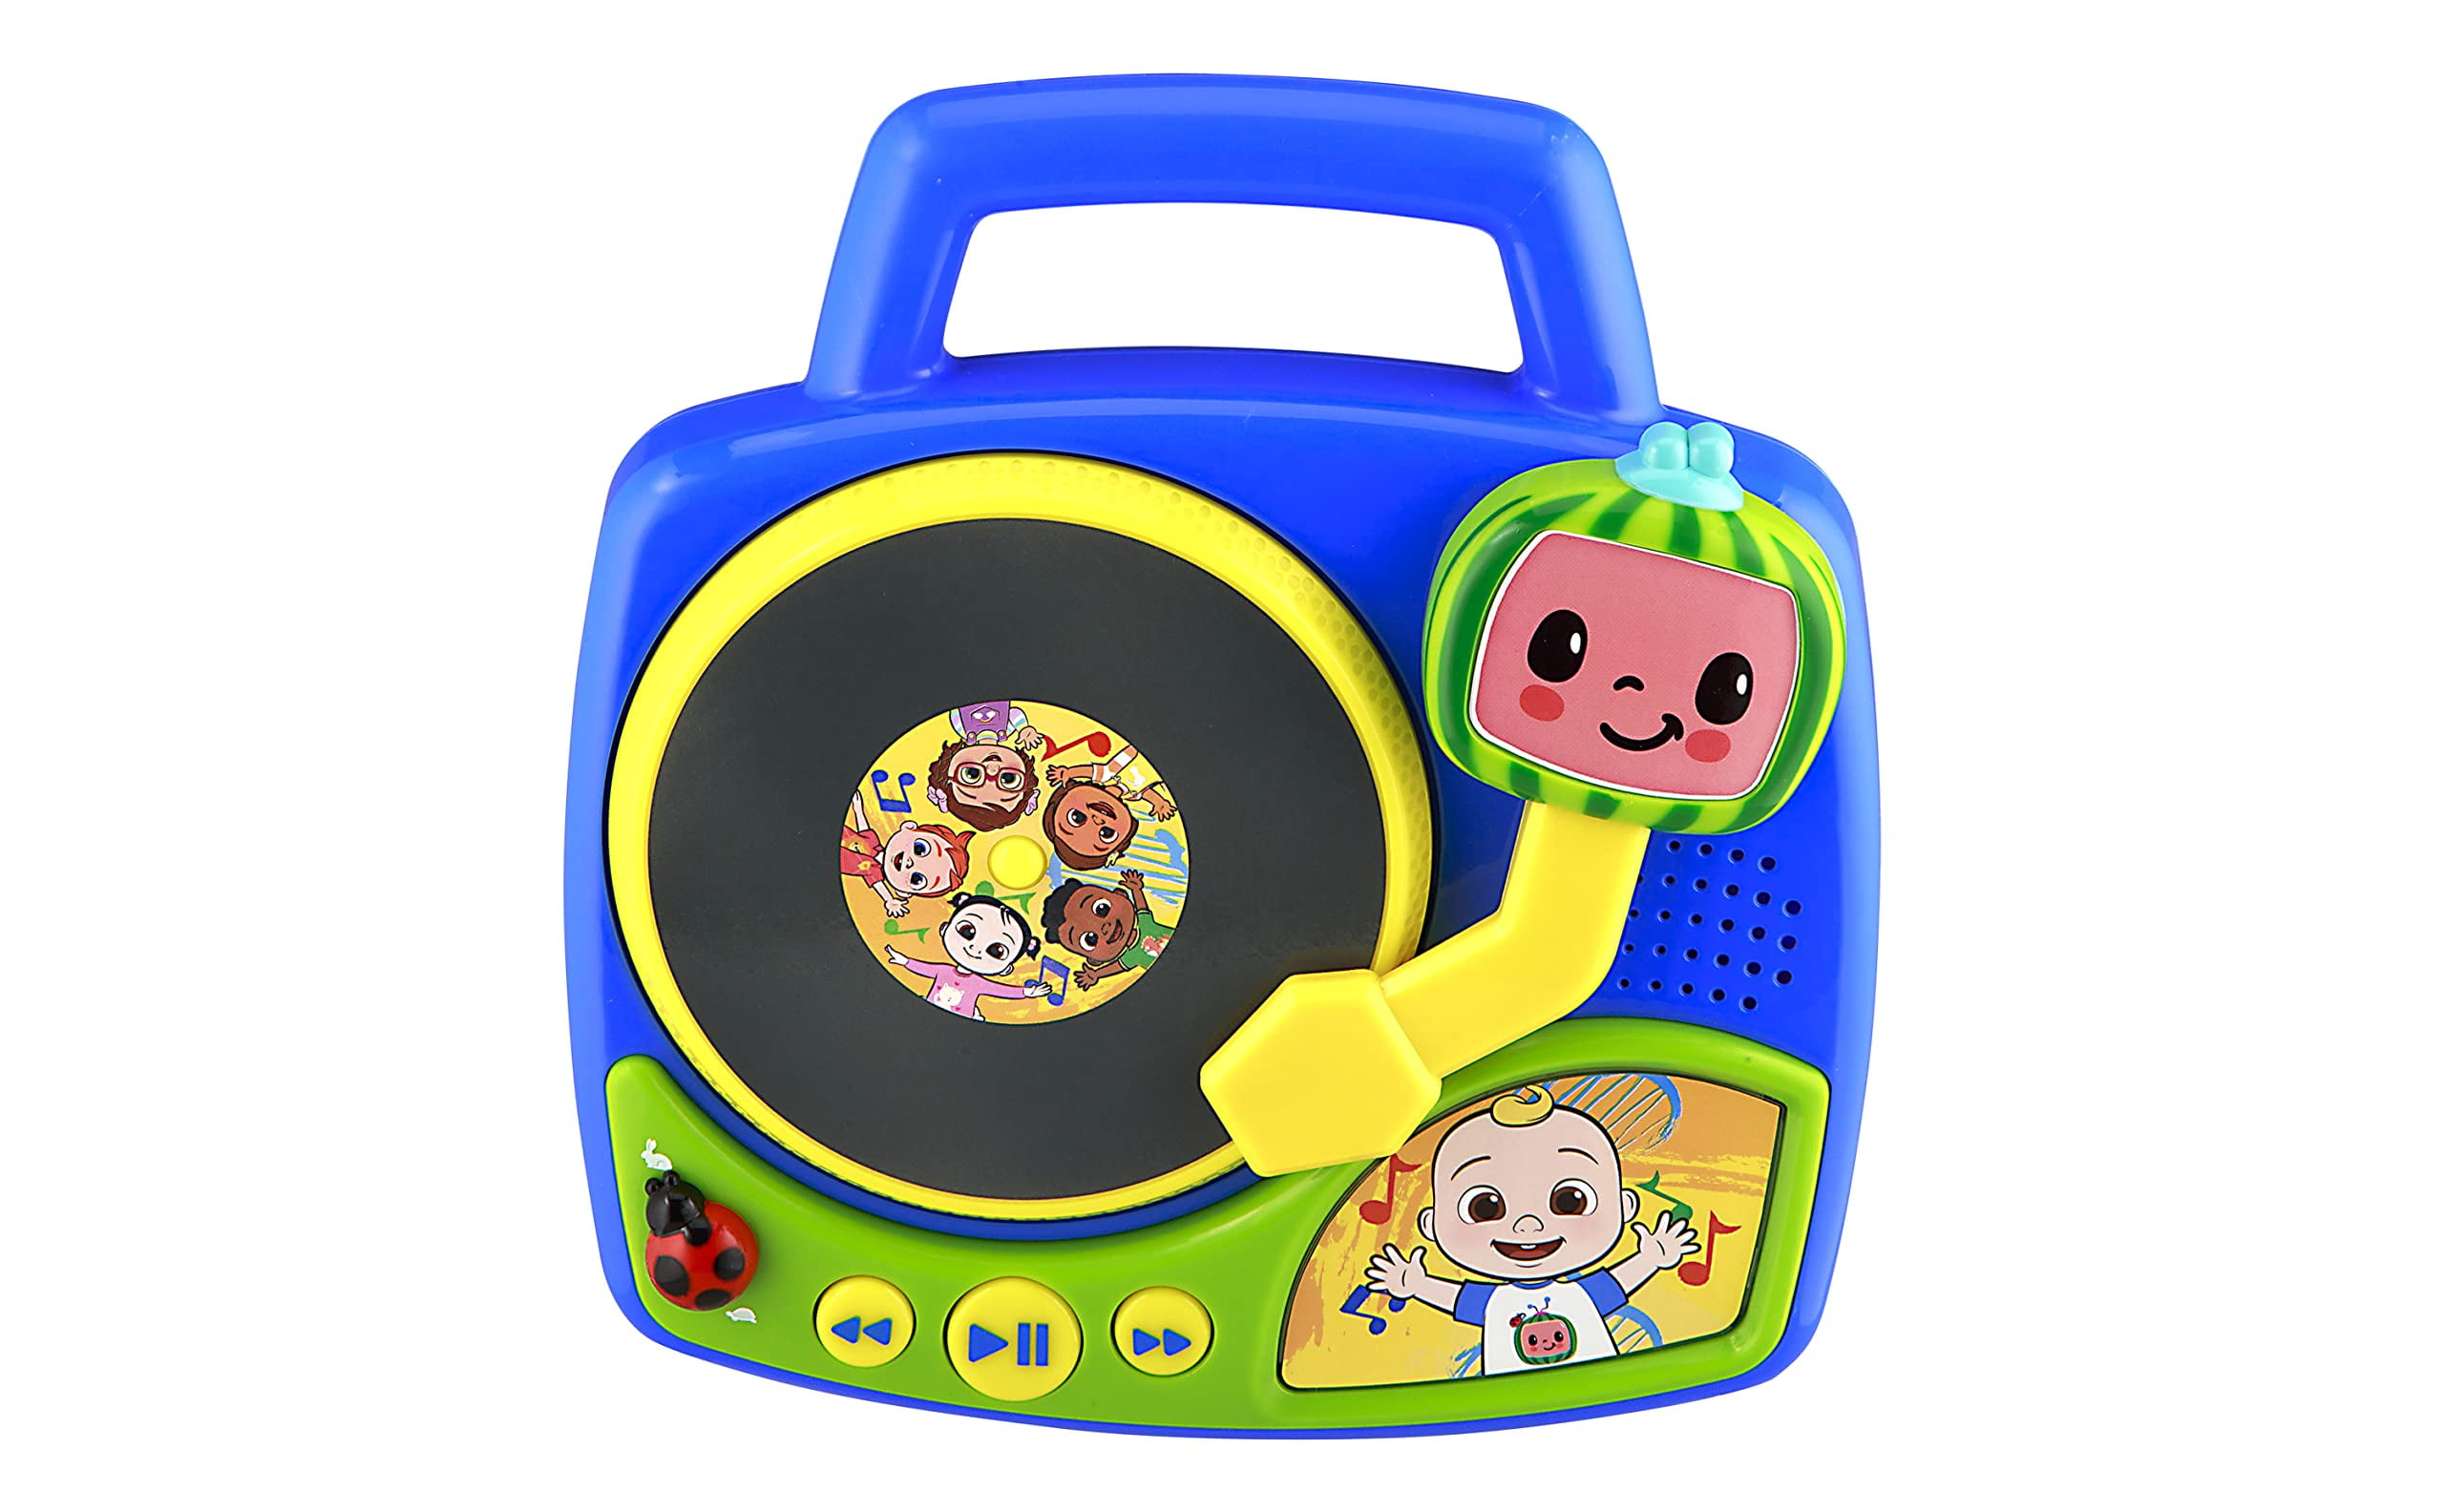 eKids Cocomelon Toy Music Player Includes Freeze Dance, Musical Toy for  Toddlers with Built-in Nursery Rhymes for Fans of Cocomelon Toys and Gifts  for